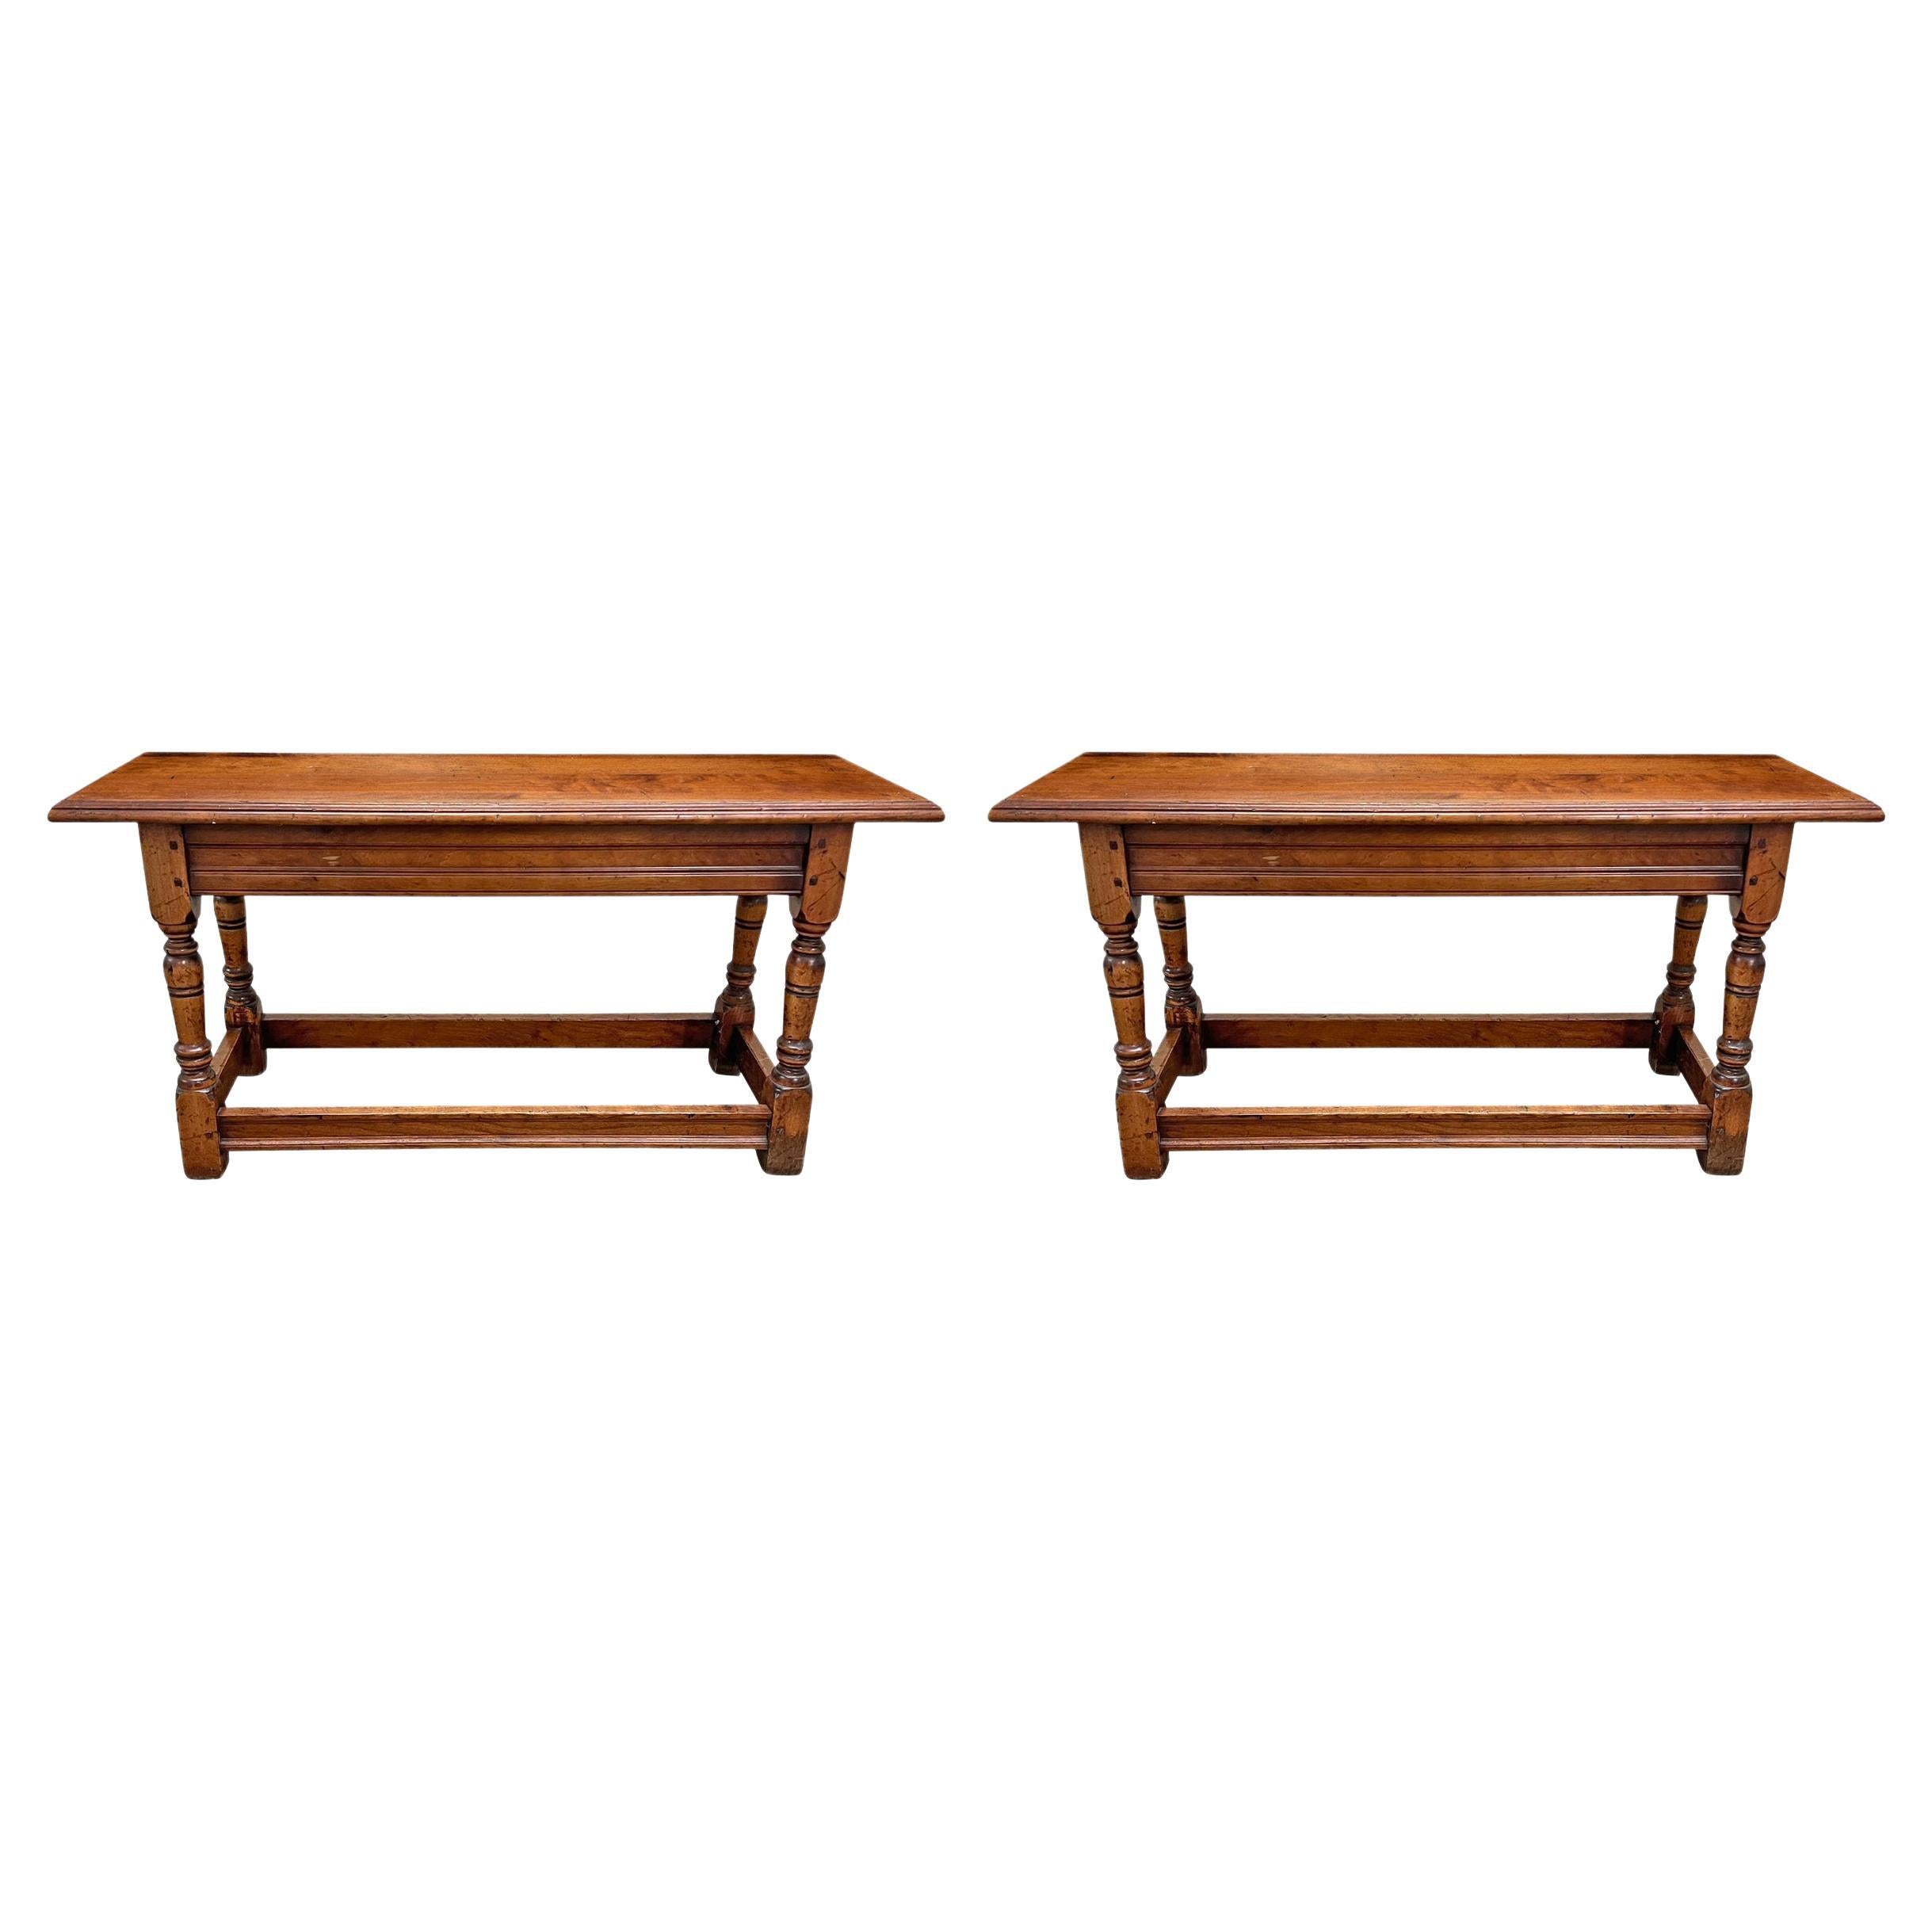 Pair of English Tapered Benches